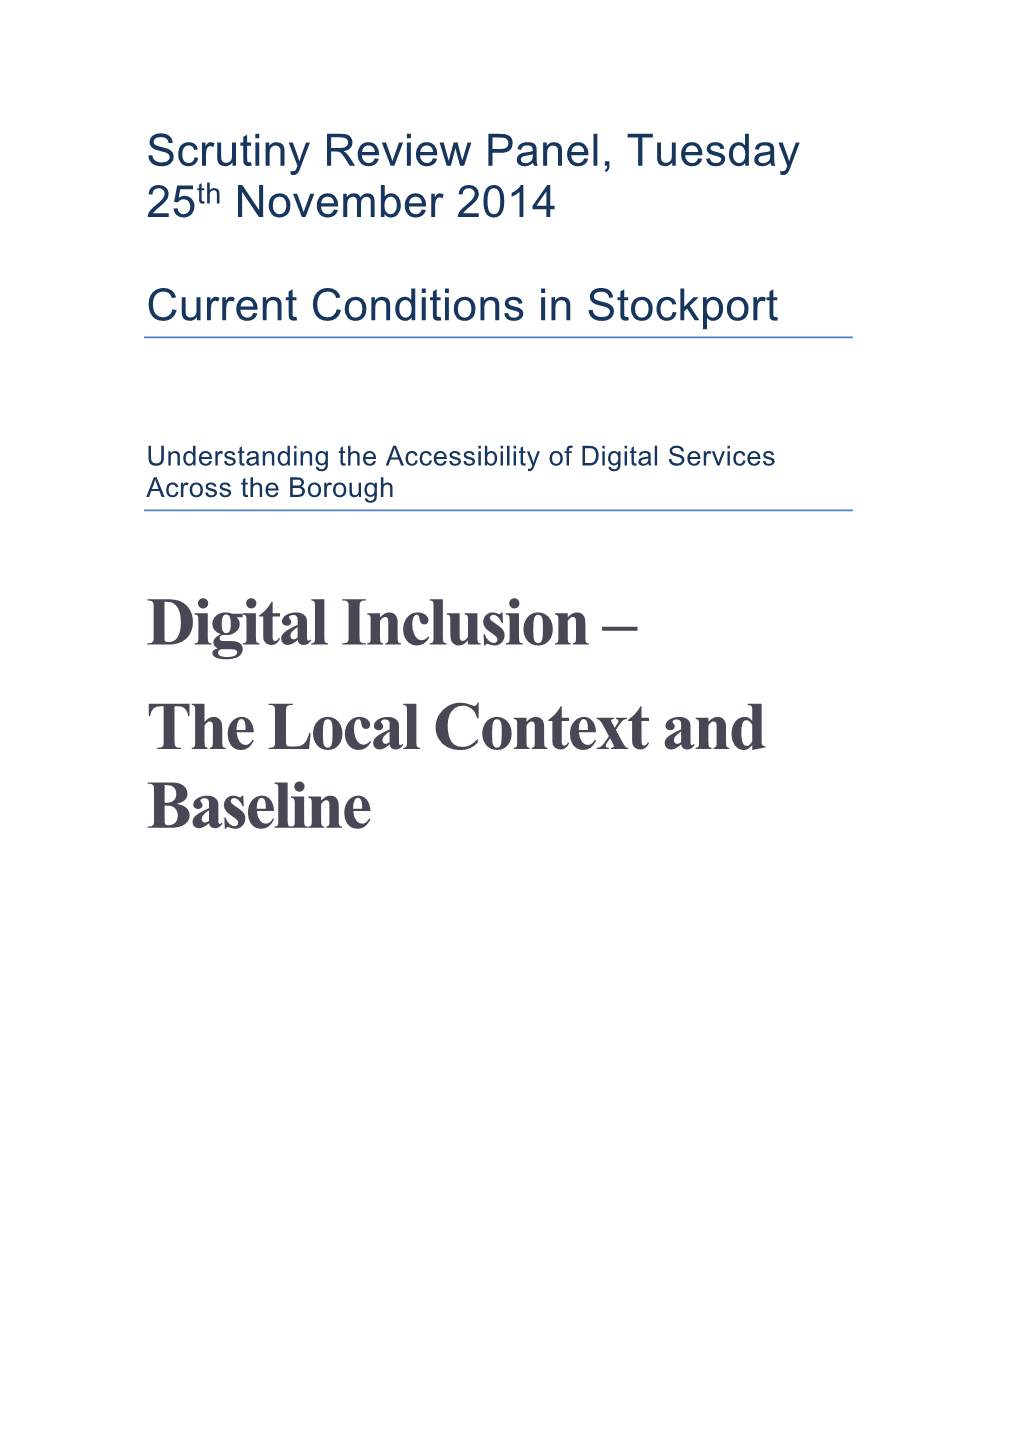 Digital Inclusion – the Local Context and Baseline Introduction